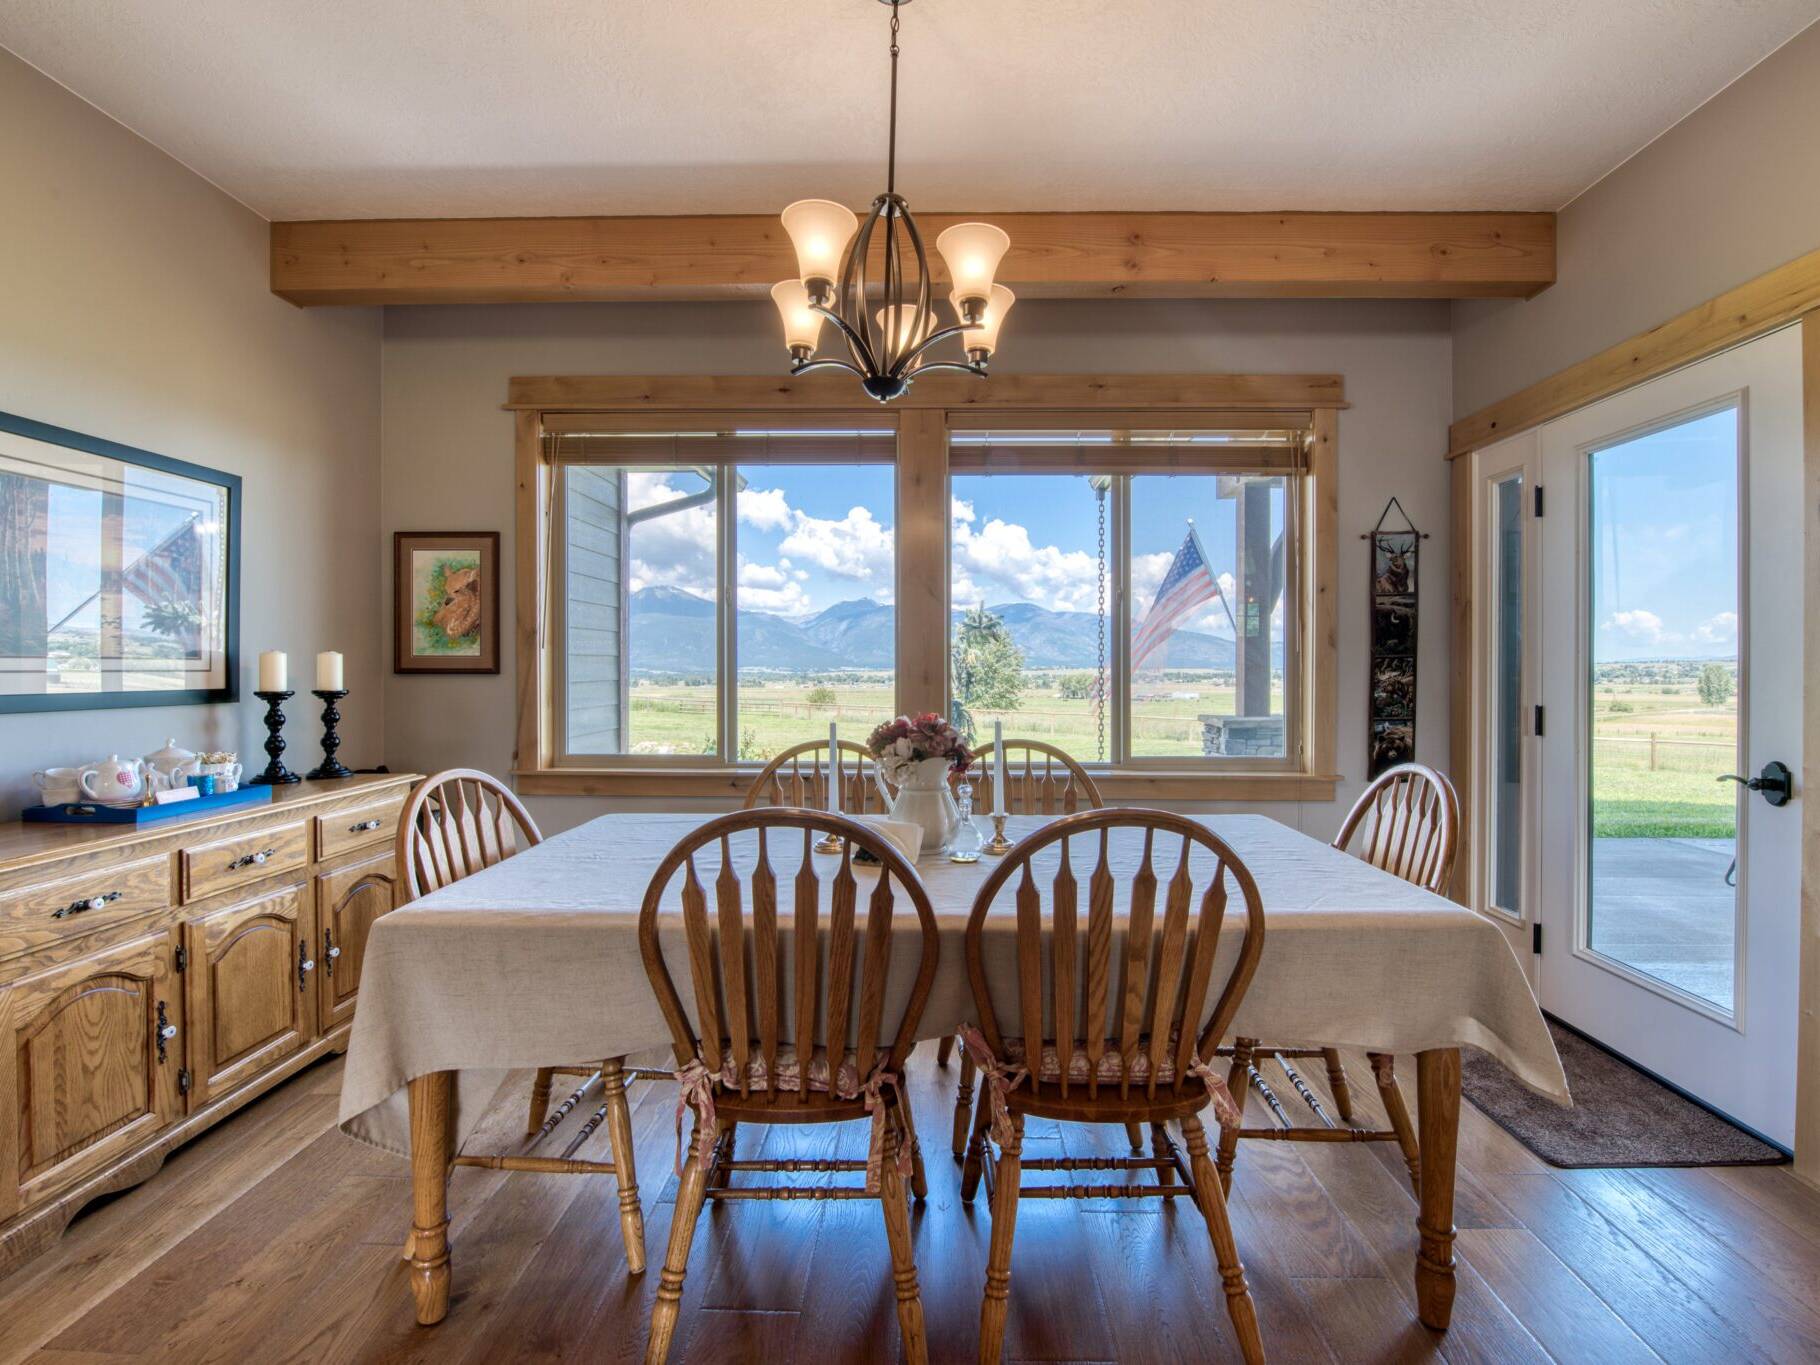 Dining area with ceiling beam work in a custom home built by Big Sky Builders in Stevensville, MT